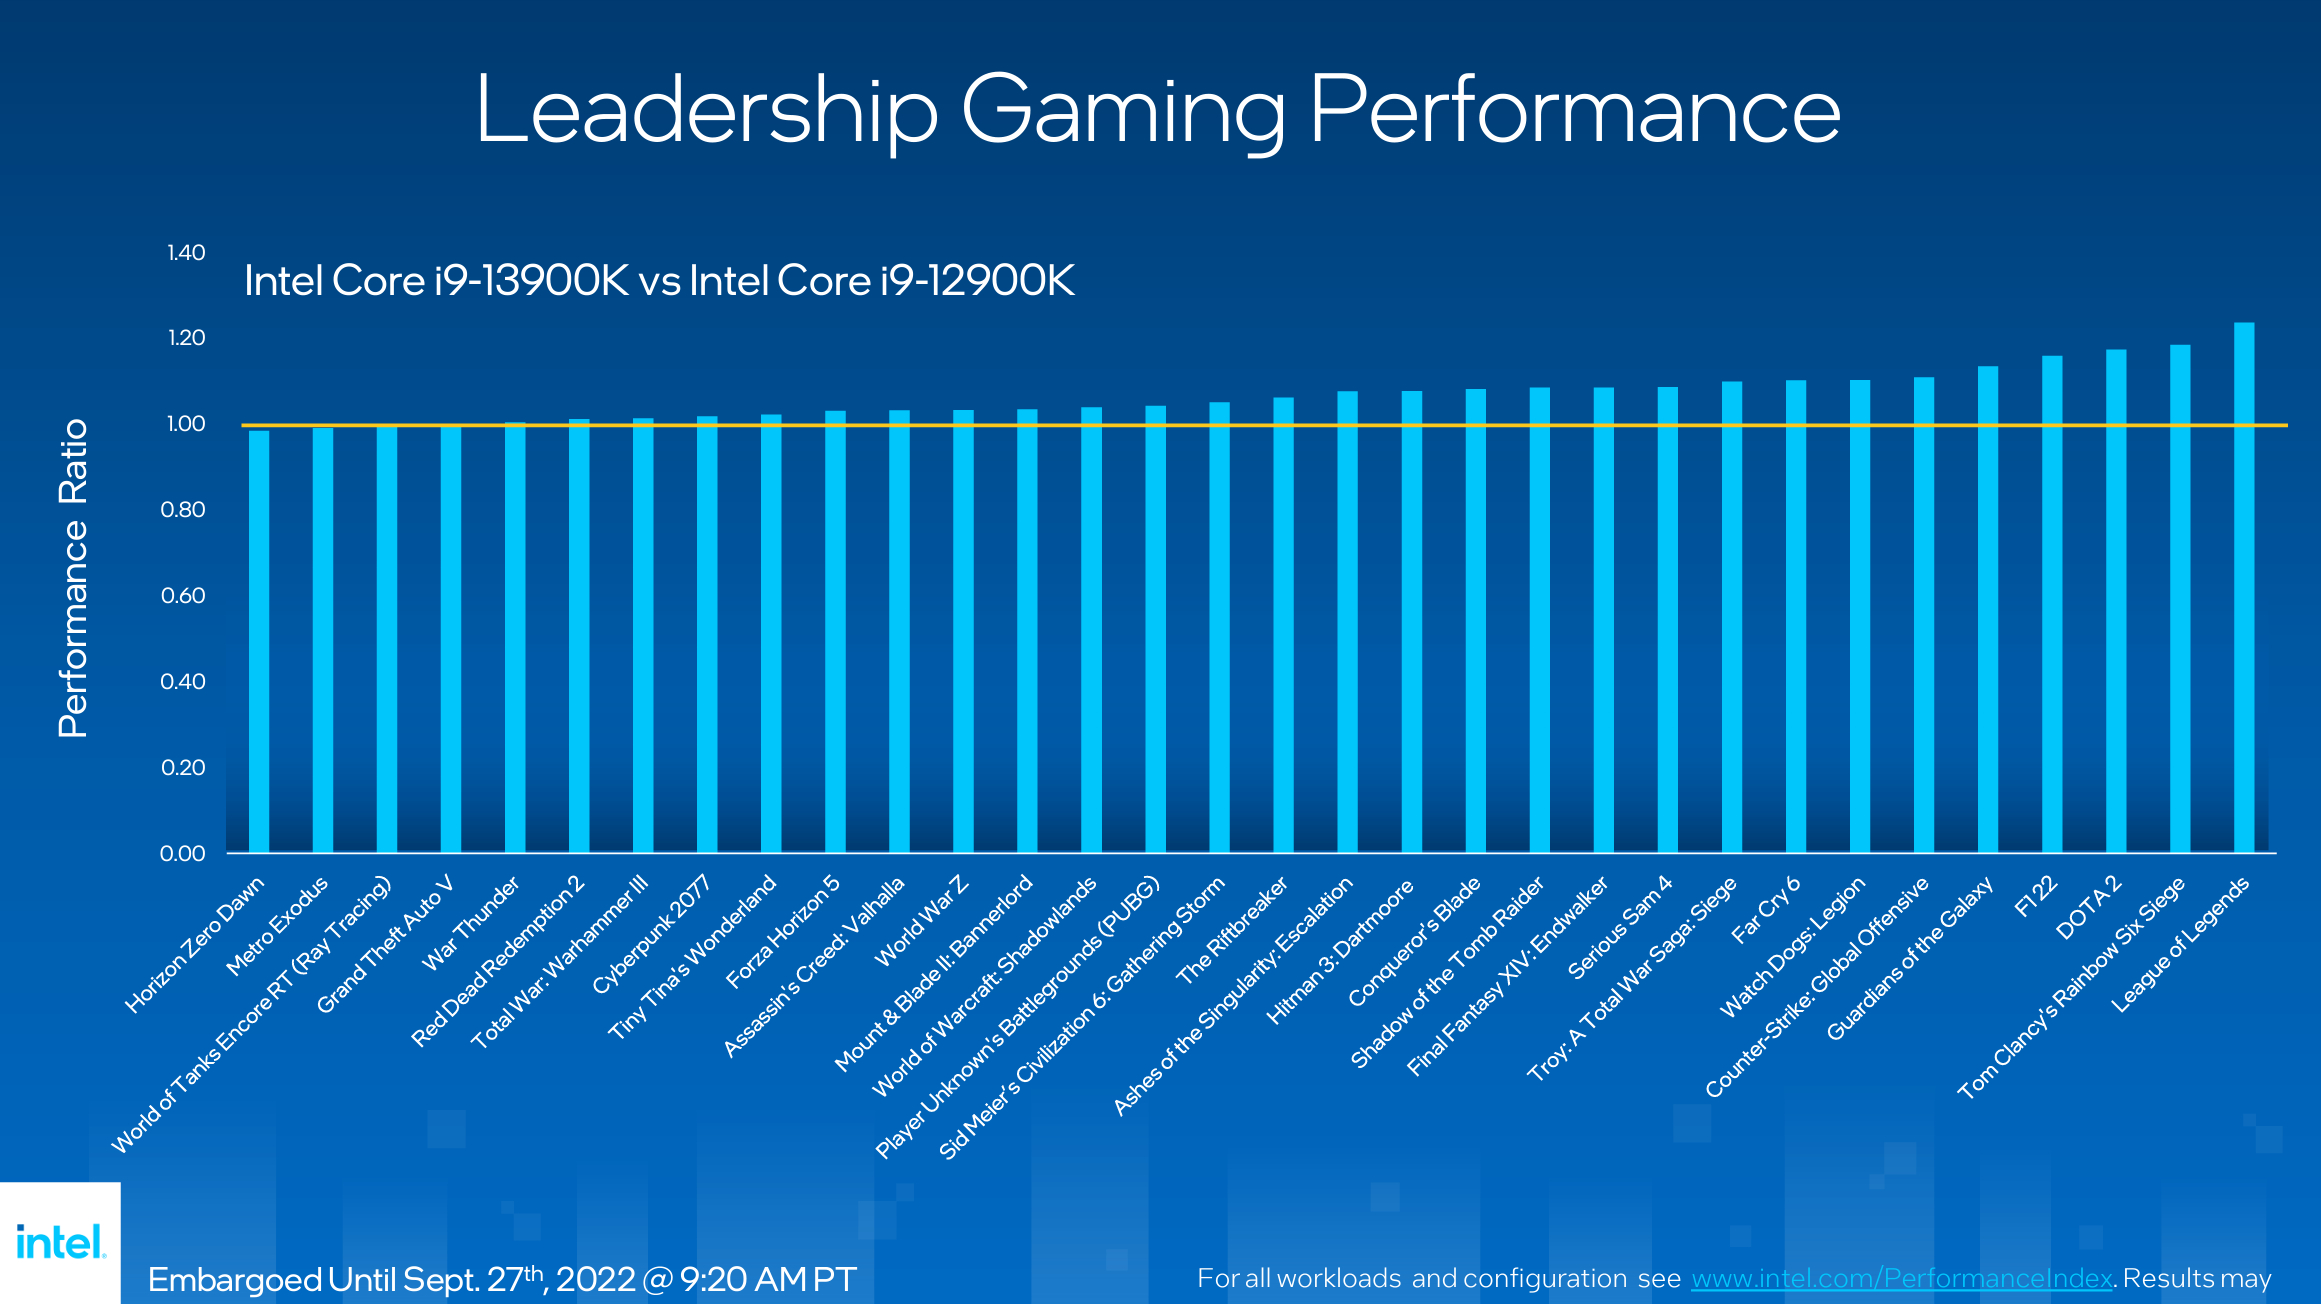 Intel Raptor Lake gaming performance comparison with Core i9 12900K